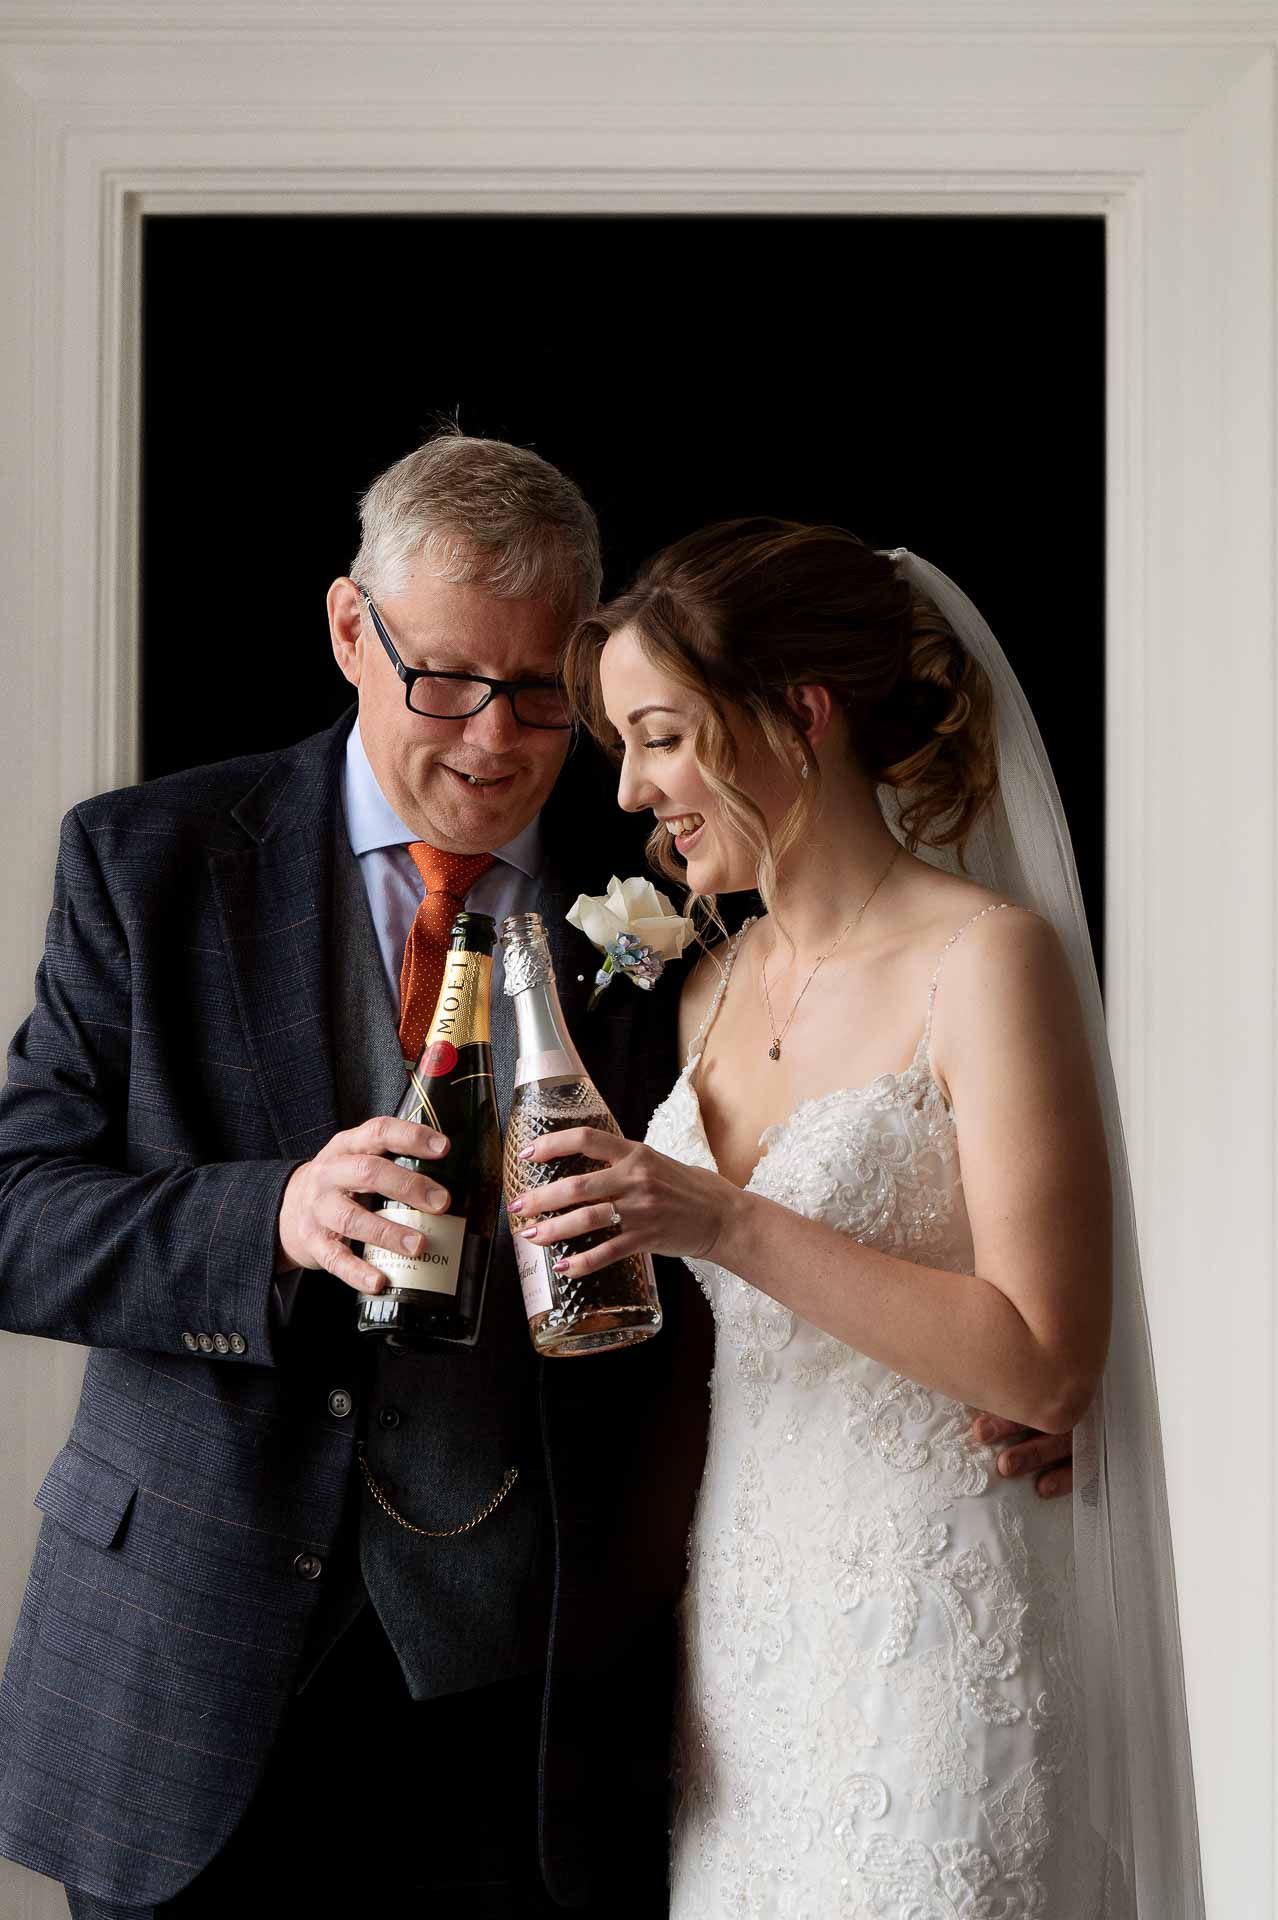 Sophie and her Dad clinking Champagne bottles just before she marries Ross at Swynford Manor. Photo by Fountain Photography.